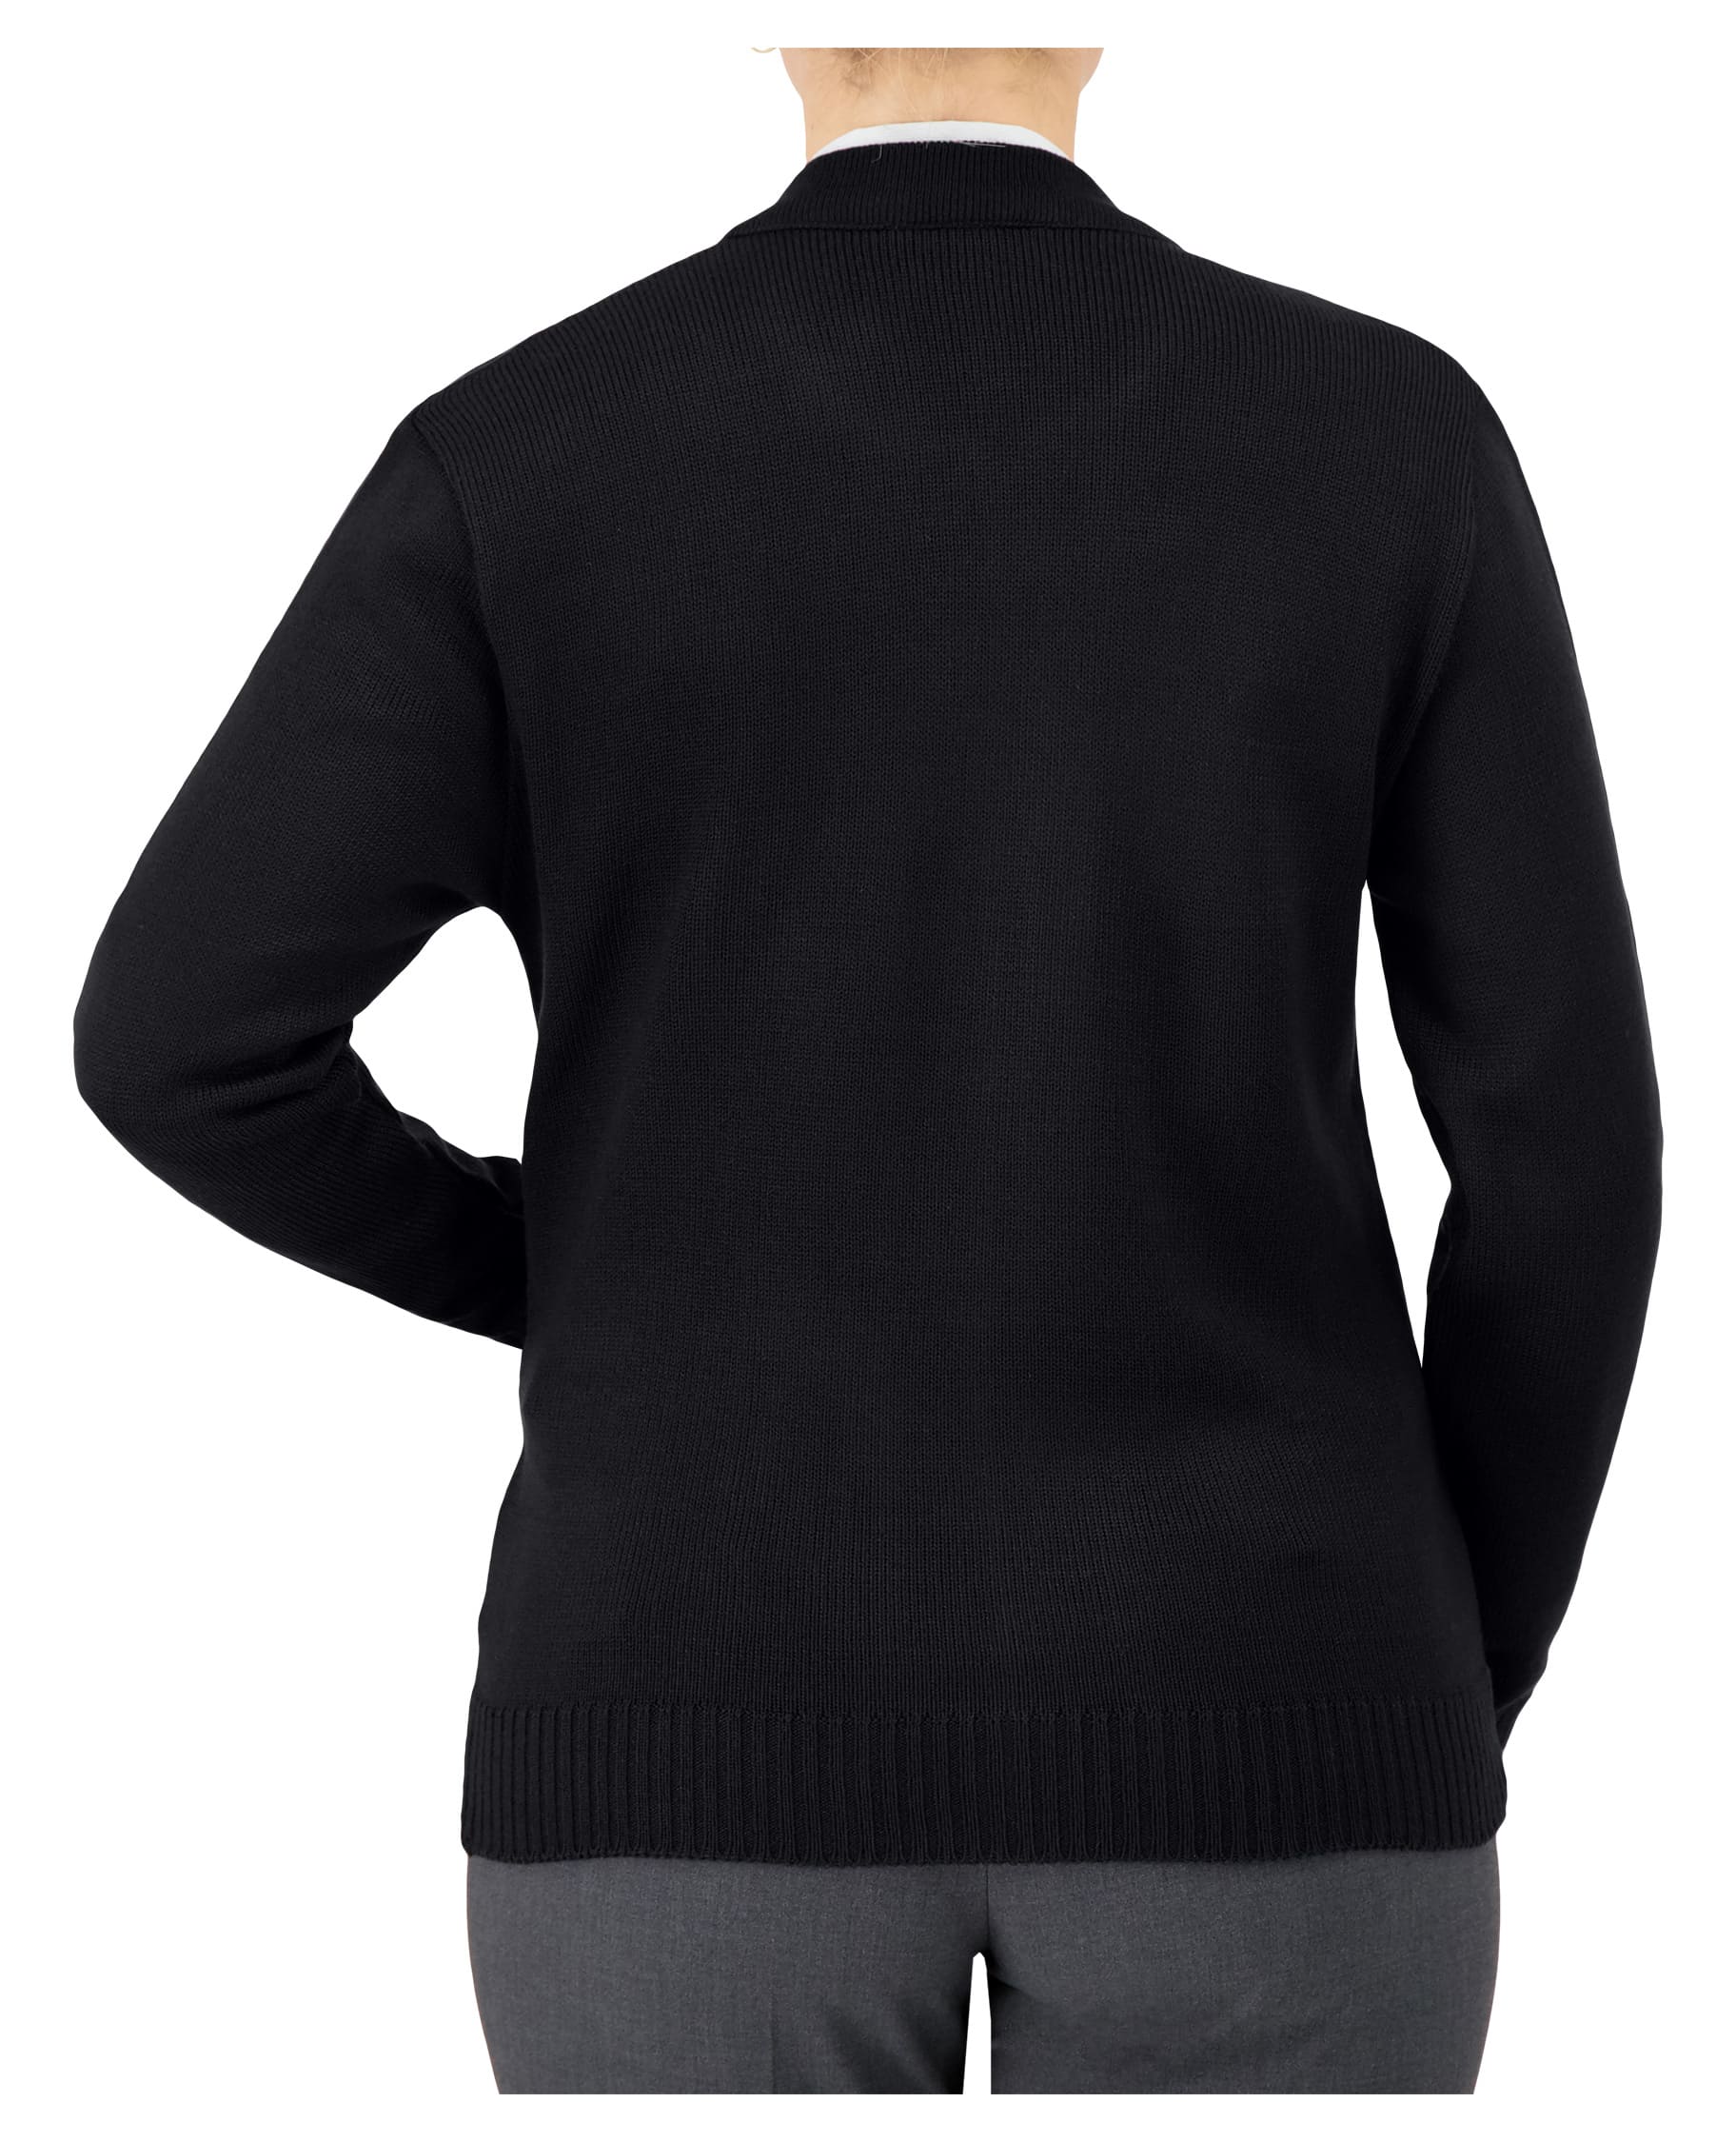 back of black zip up uniform sweater with pockets 